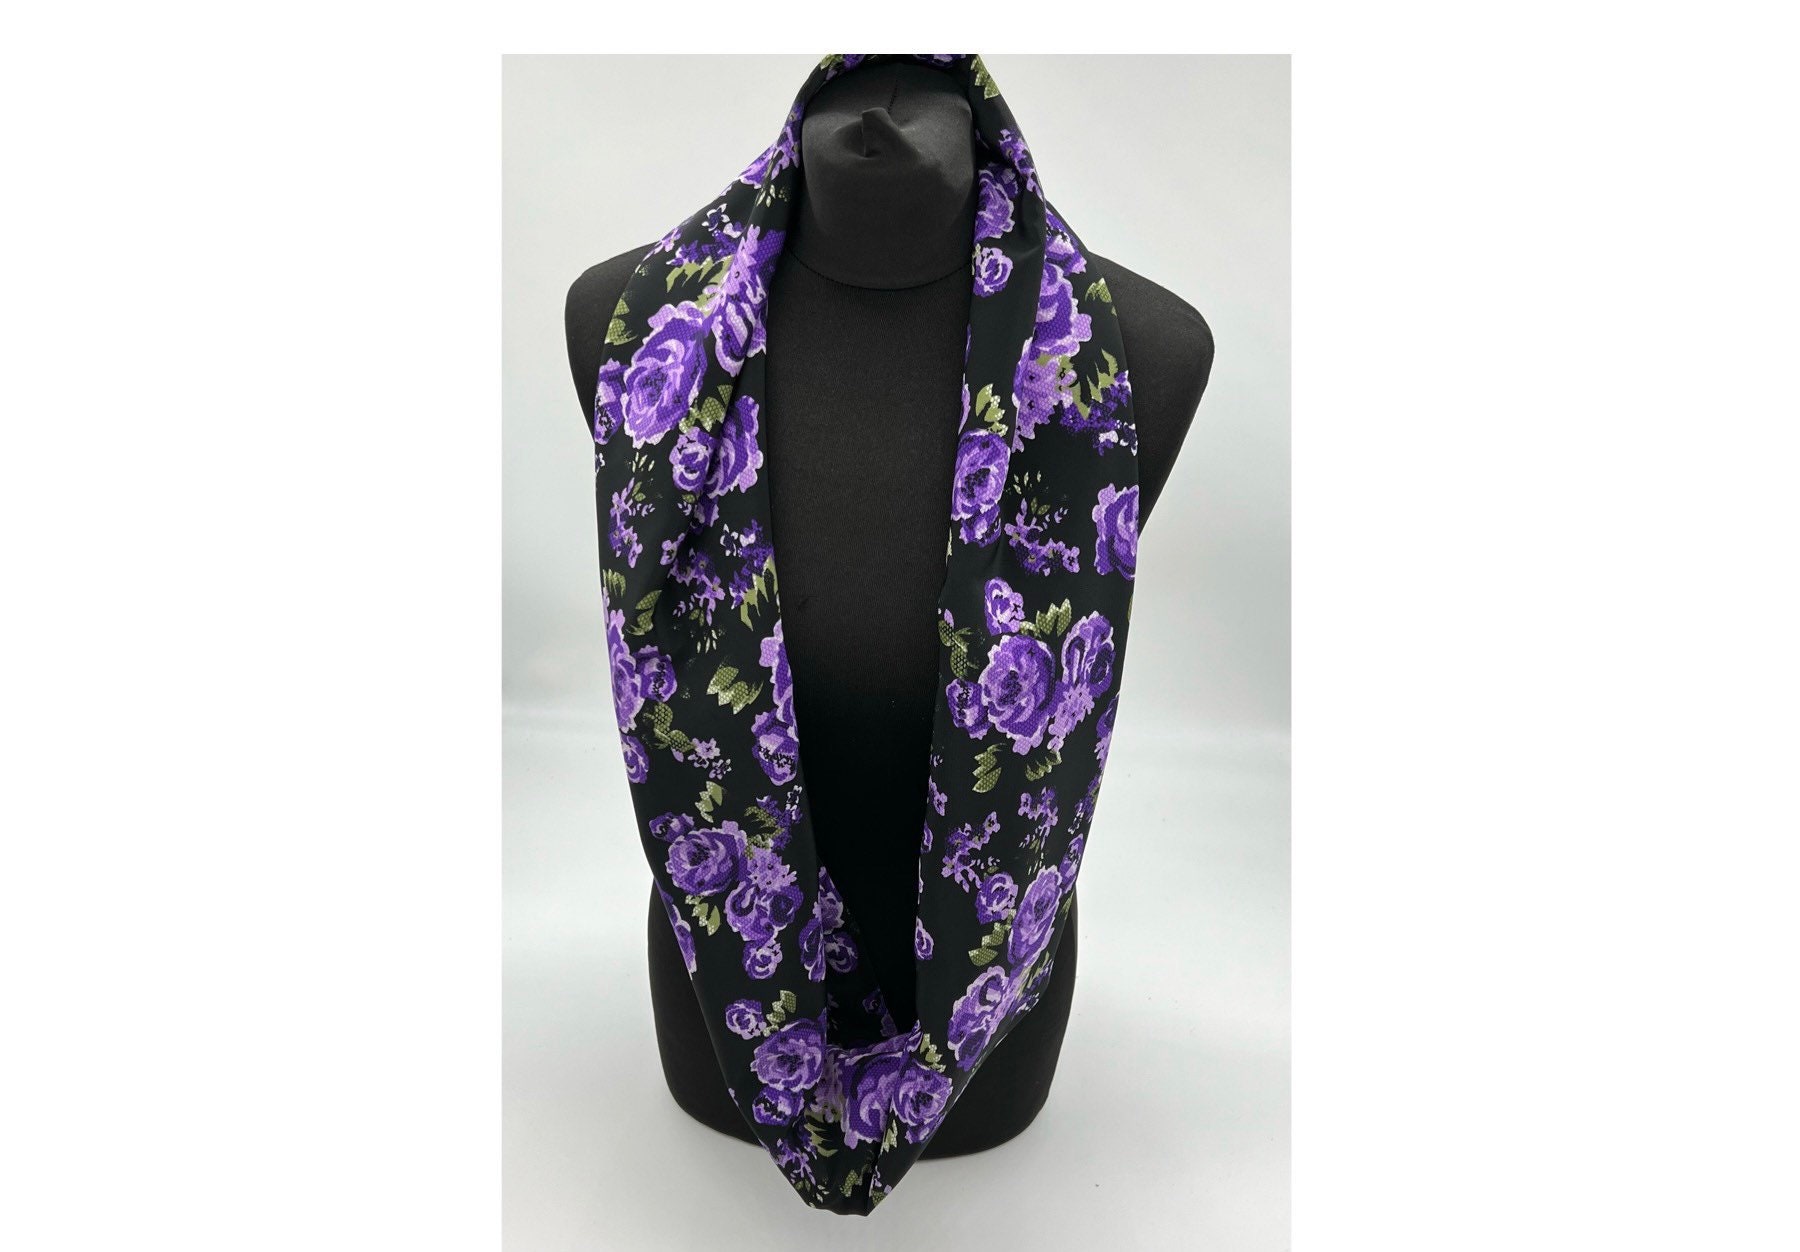 Purple Floral Infinity Scarf, Black, Purple and Lilac Flower Print  Multicoloured Loop Scarf, Gift for Her 